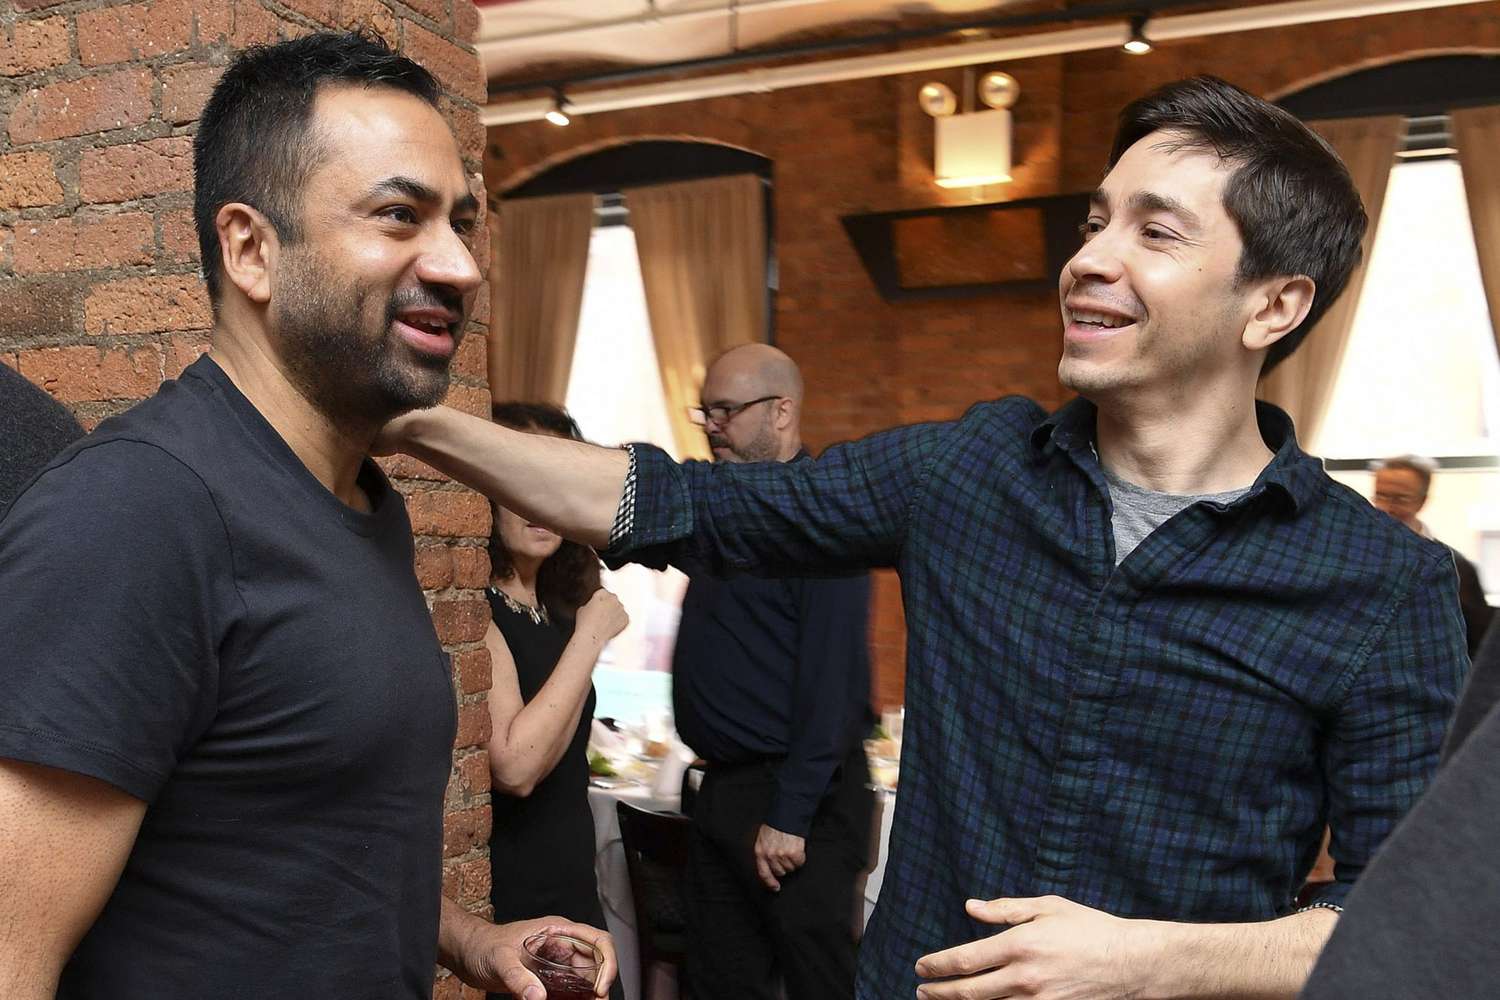 NEW YORK, NEW YORK - APRIL 25: Kal Penn (L) and Justin Long attend the 2019 Tribeca Film Festival Jury Lunch at Tribeca Grill Loft on April 25, 2019 in New York City. (Photo by Dia Dipasupil/Getty Images for Tribeca Film Festival)